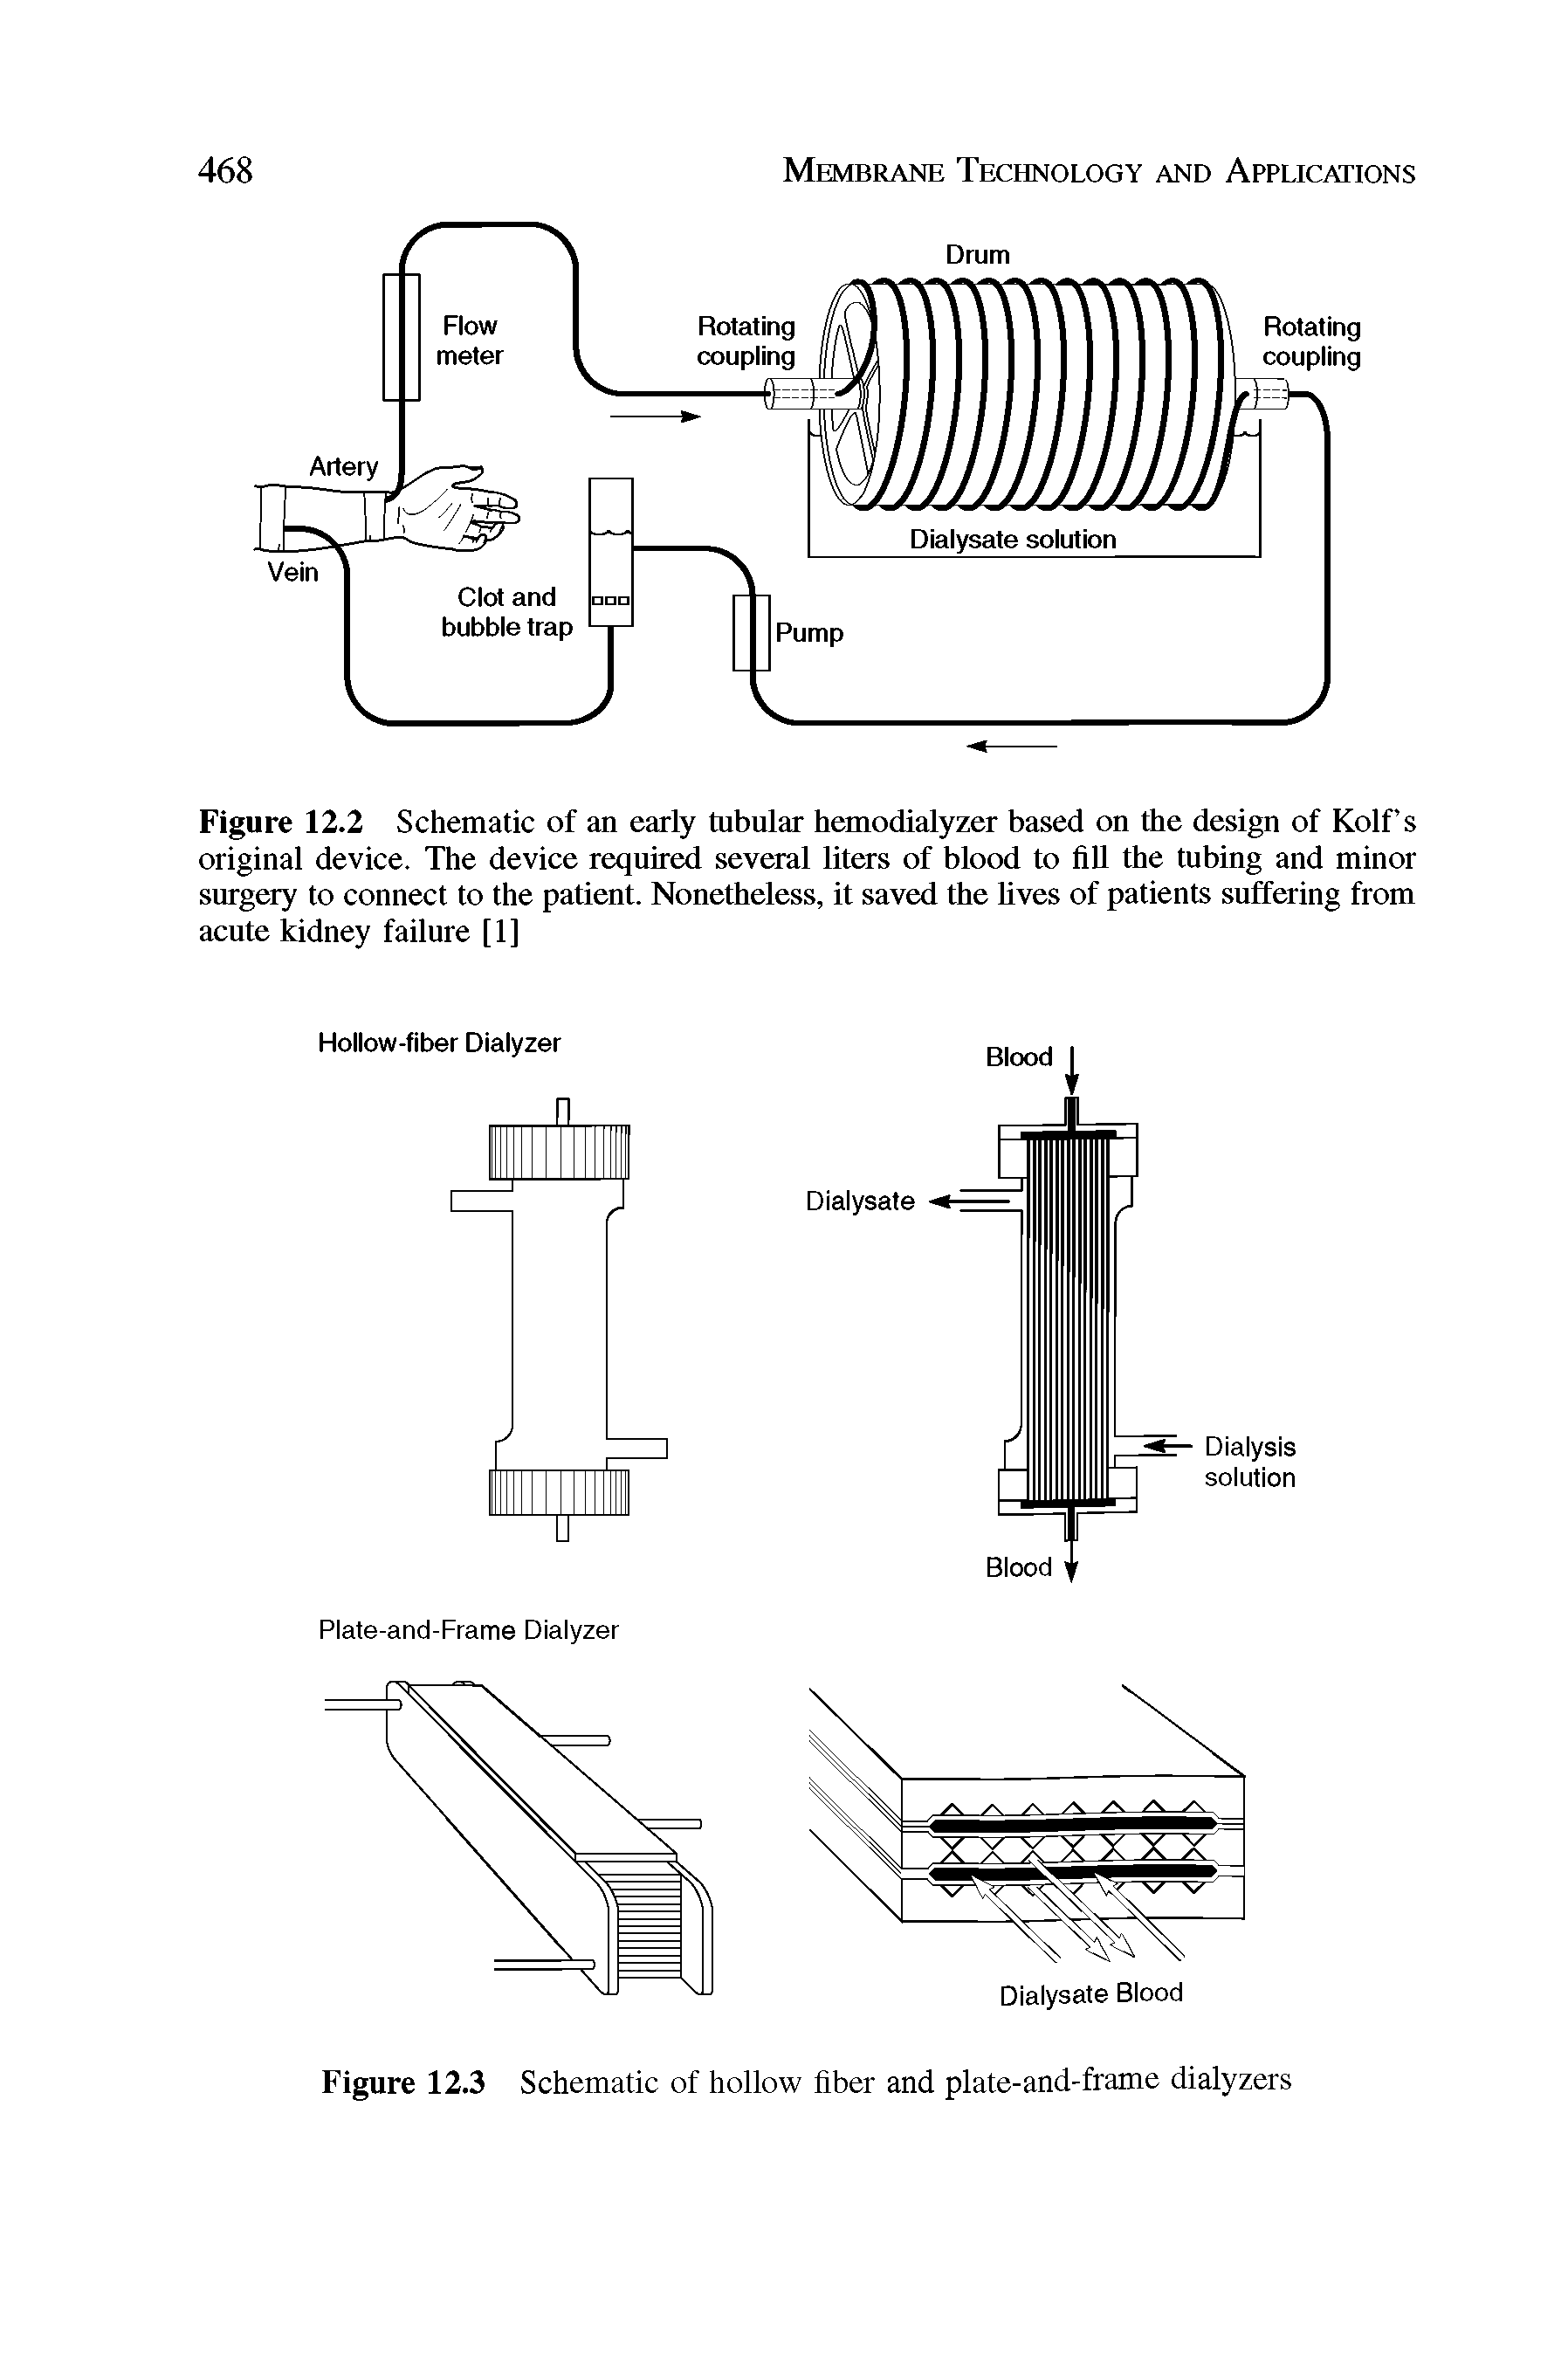 Figure 12.2 Schematic of an early tubular hemodialyzer based on the design of Kolf s original device. The device required several liters of blood to fill the tubing and minor surgery to connect to the patient. Nonetheless, it saved the lives of patients suffering from acute kidney failure [1]...